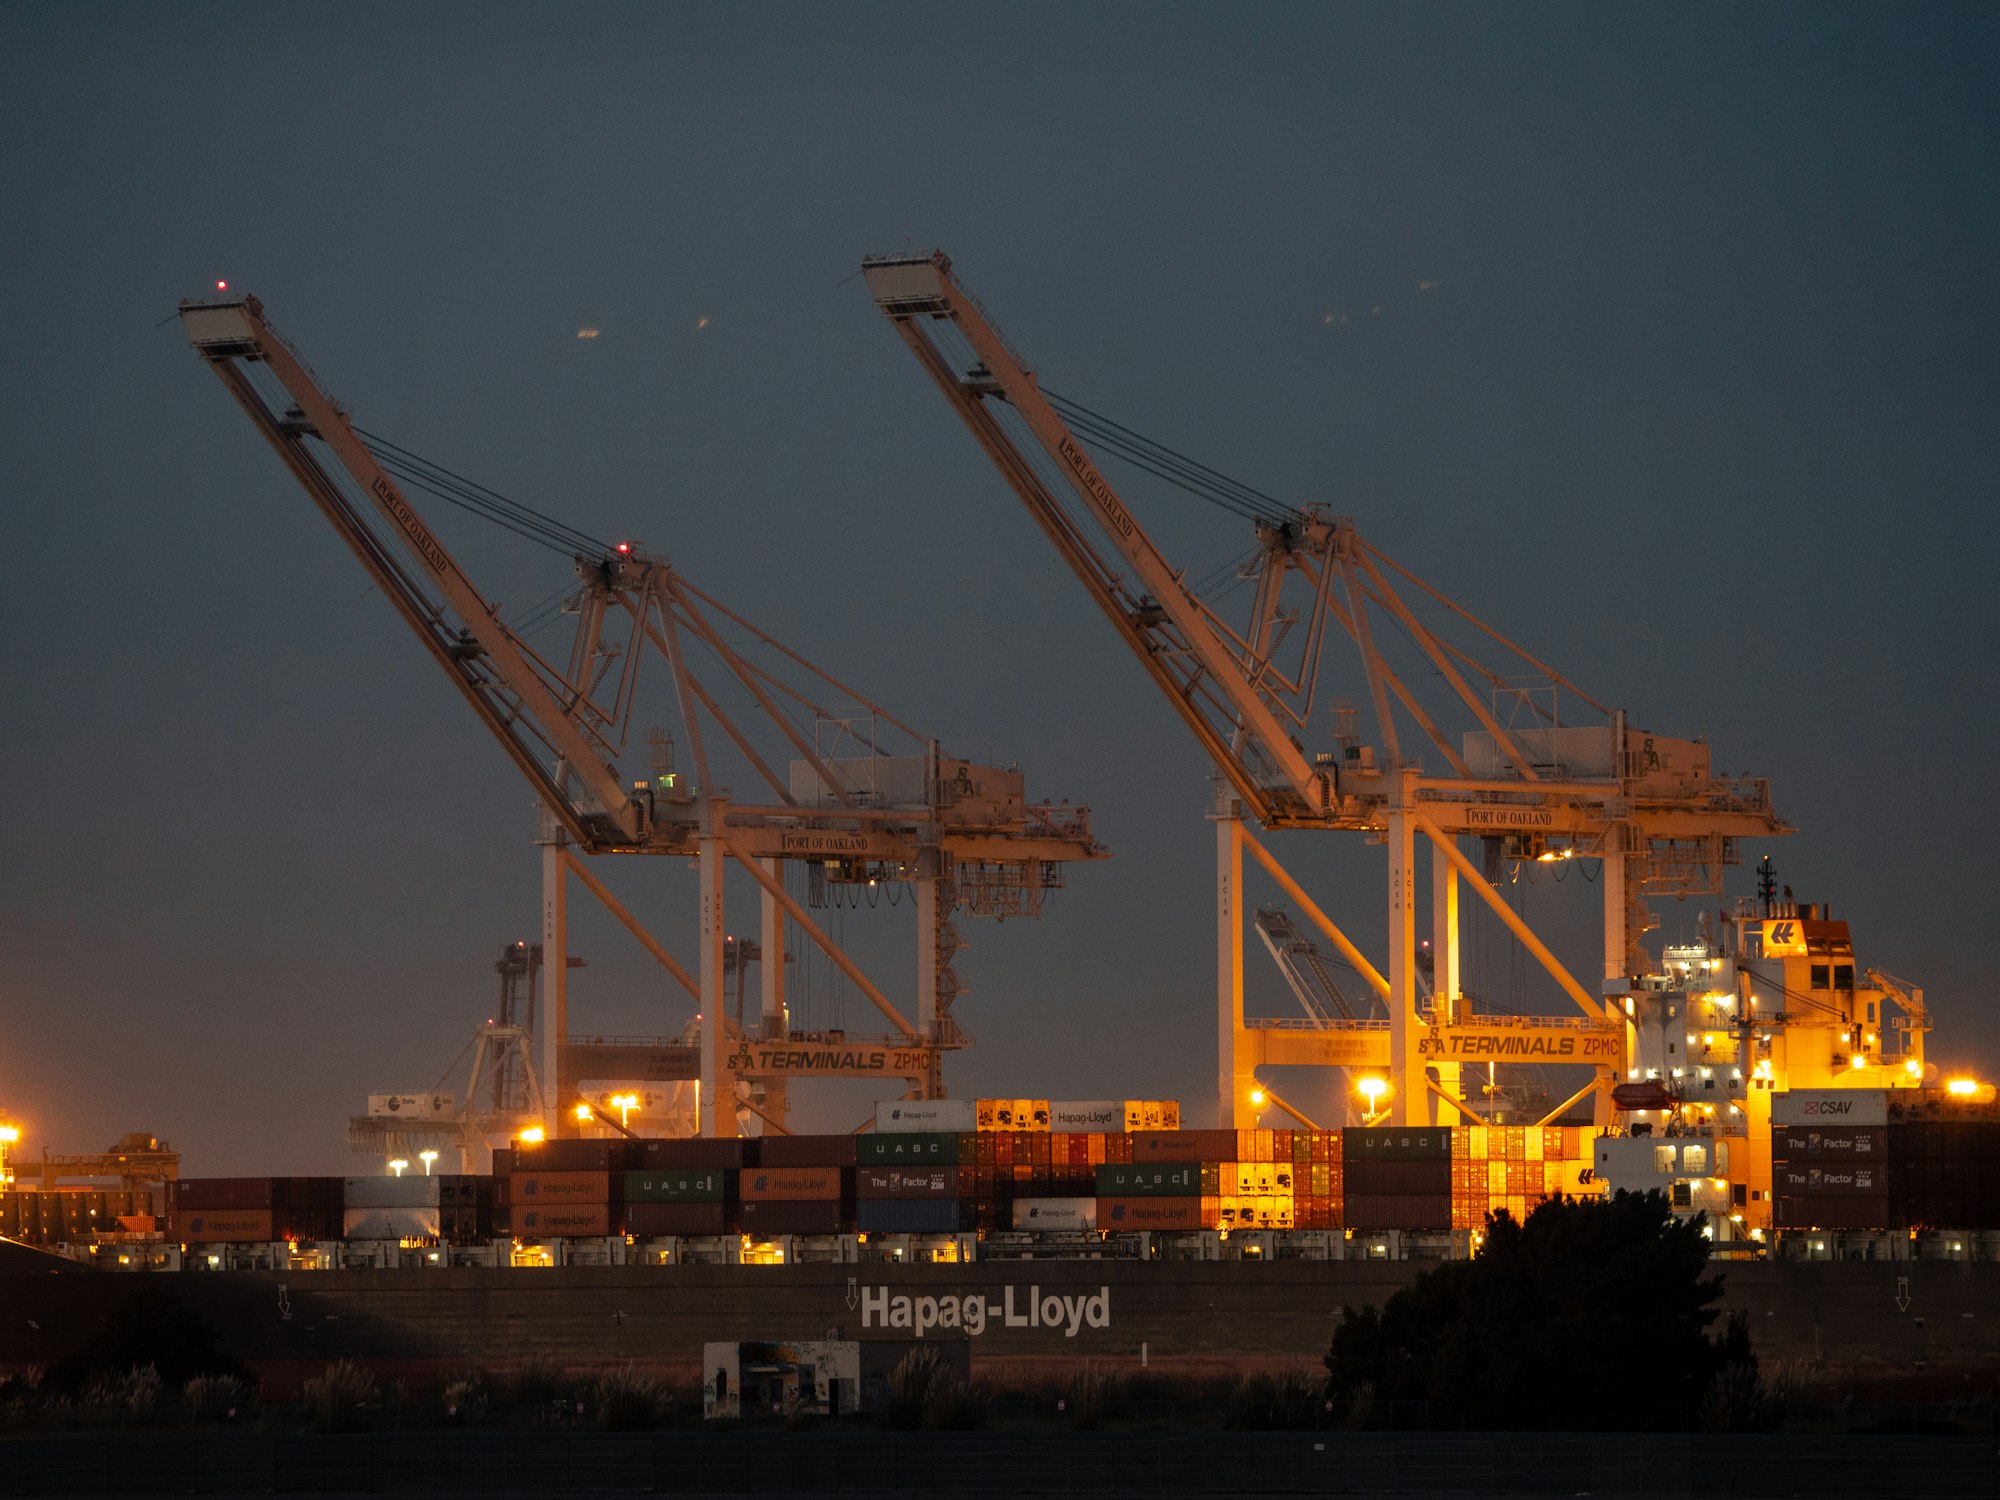 Large containers and cranes at a port at dusk, lit by yellow lights.